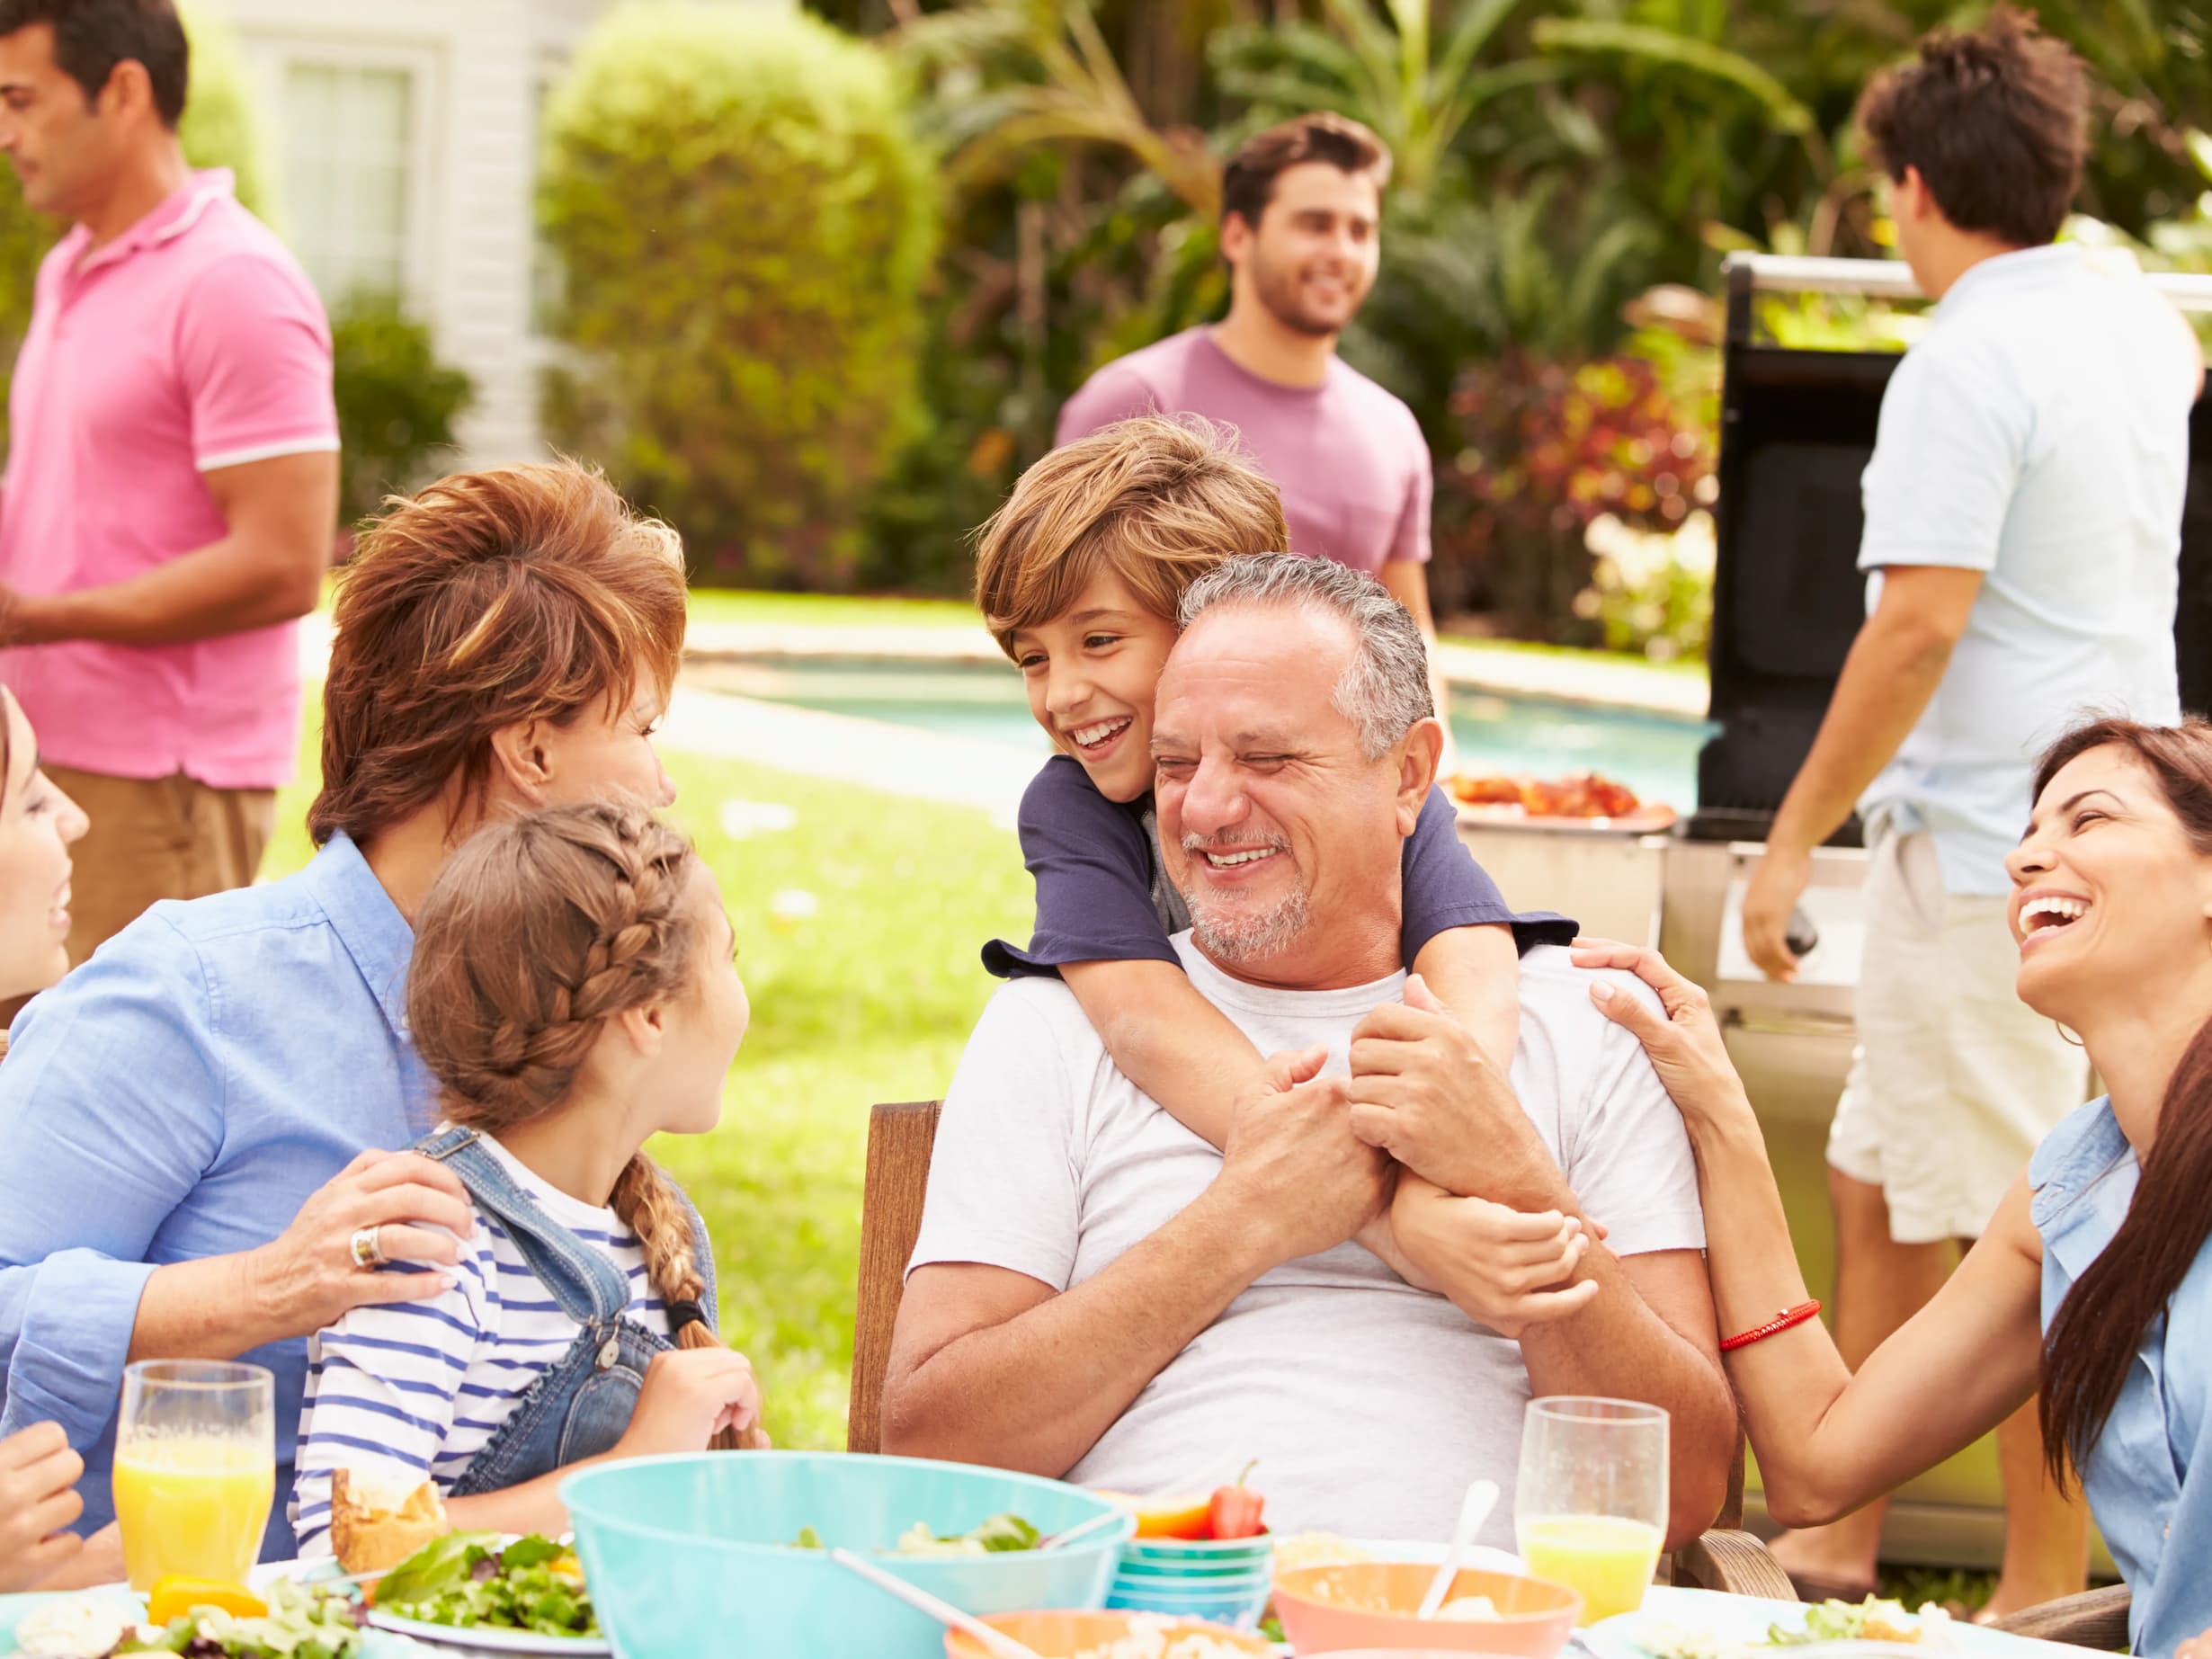 Multi generation family enjoying meal in garden together using hearing aids